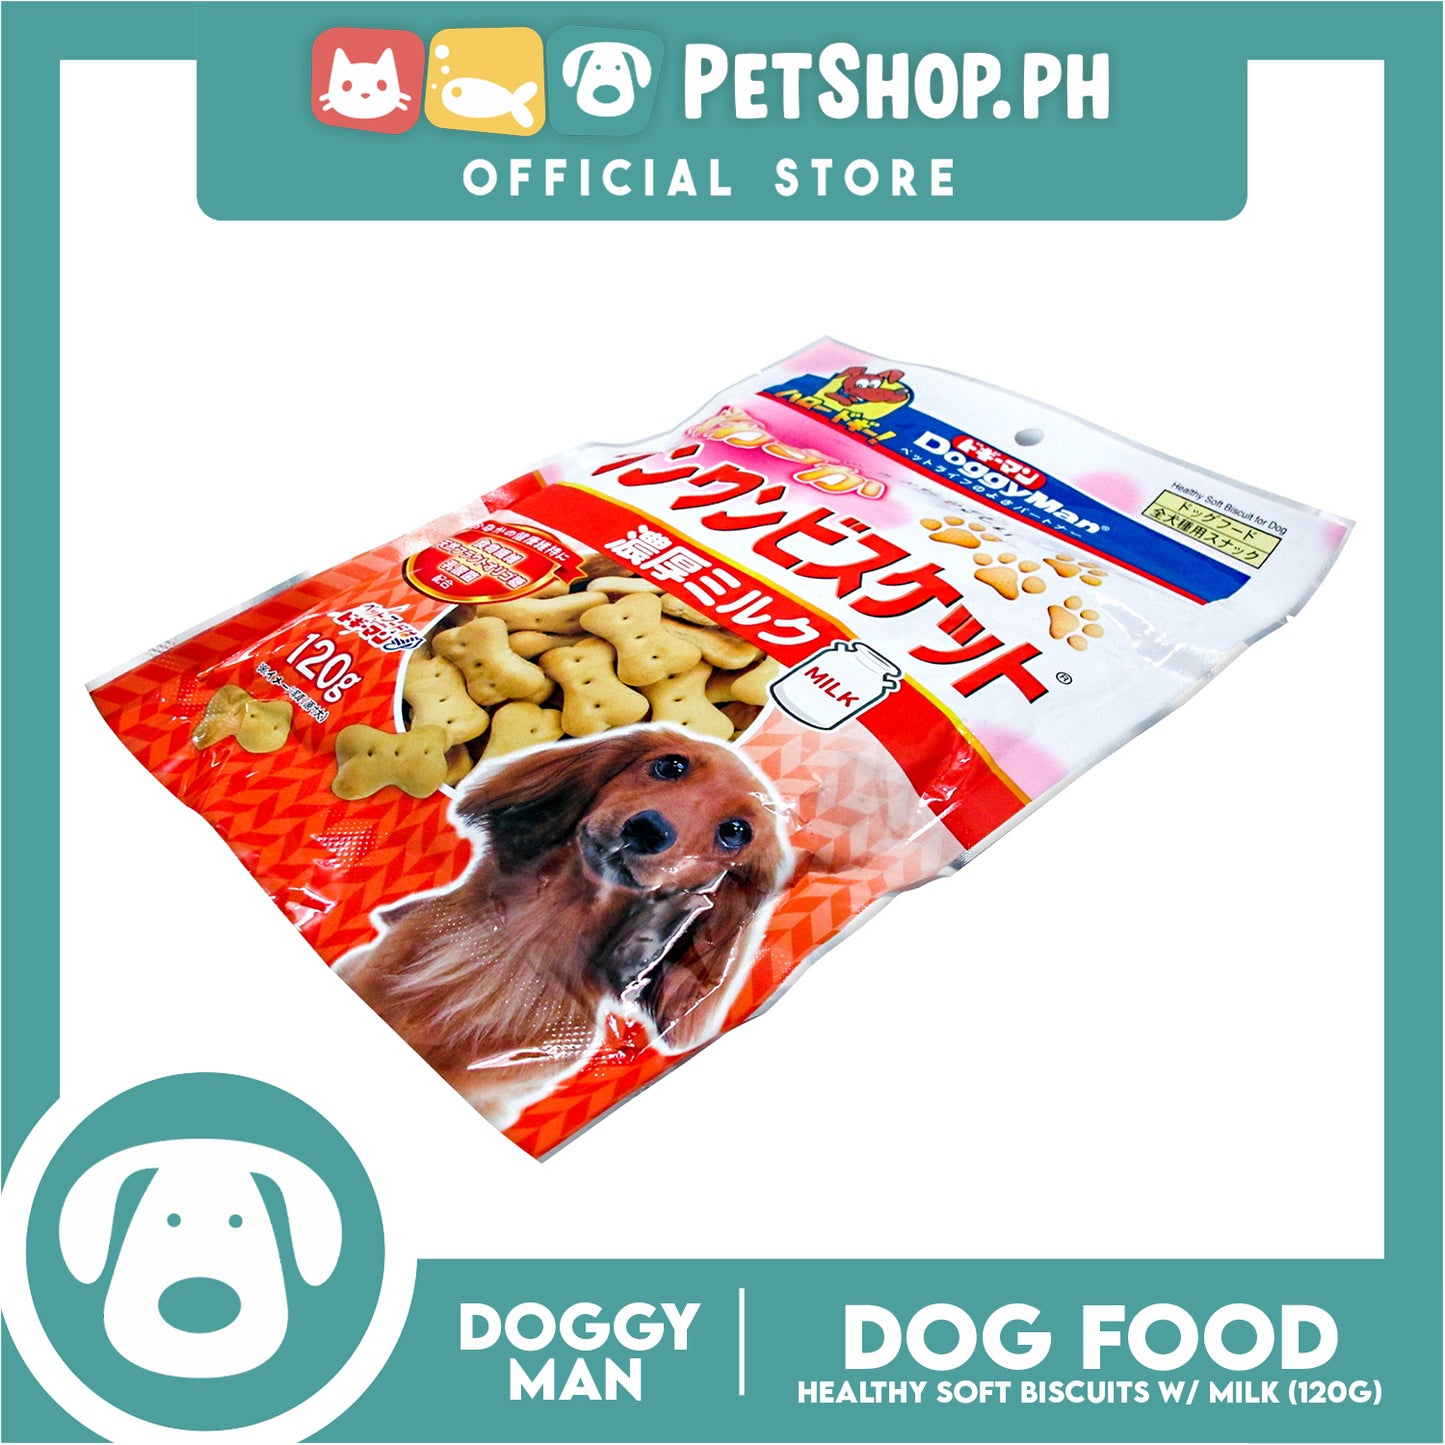 Doggyman Soft Biscuit with Rich Milk (82279) 120g